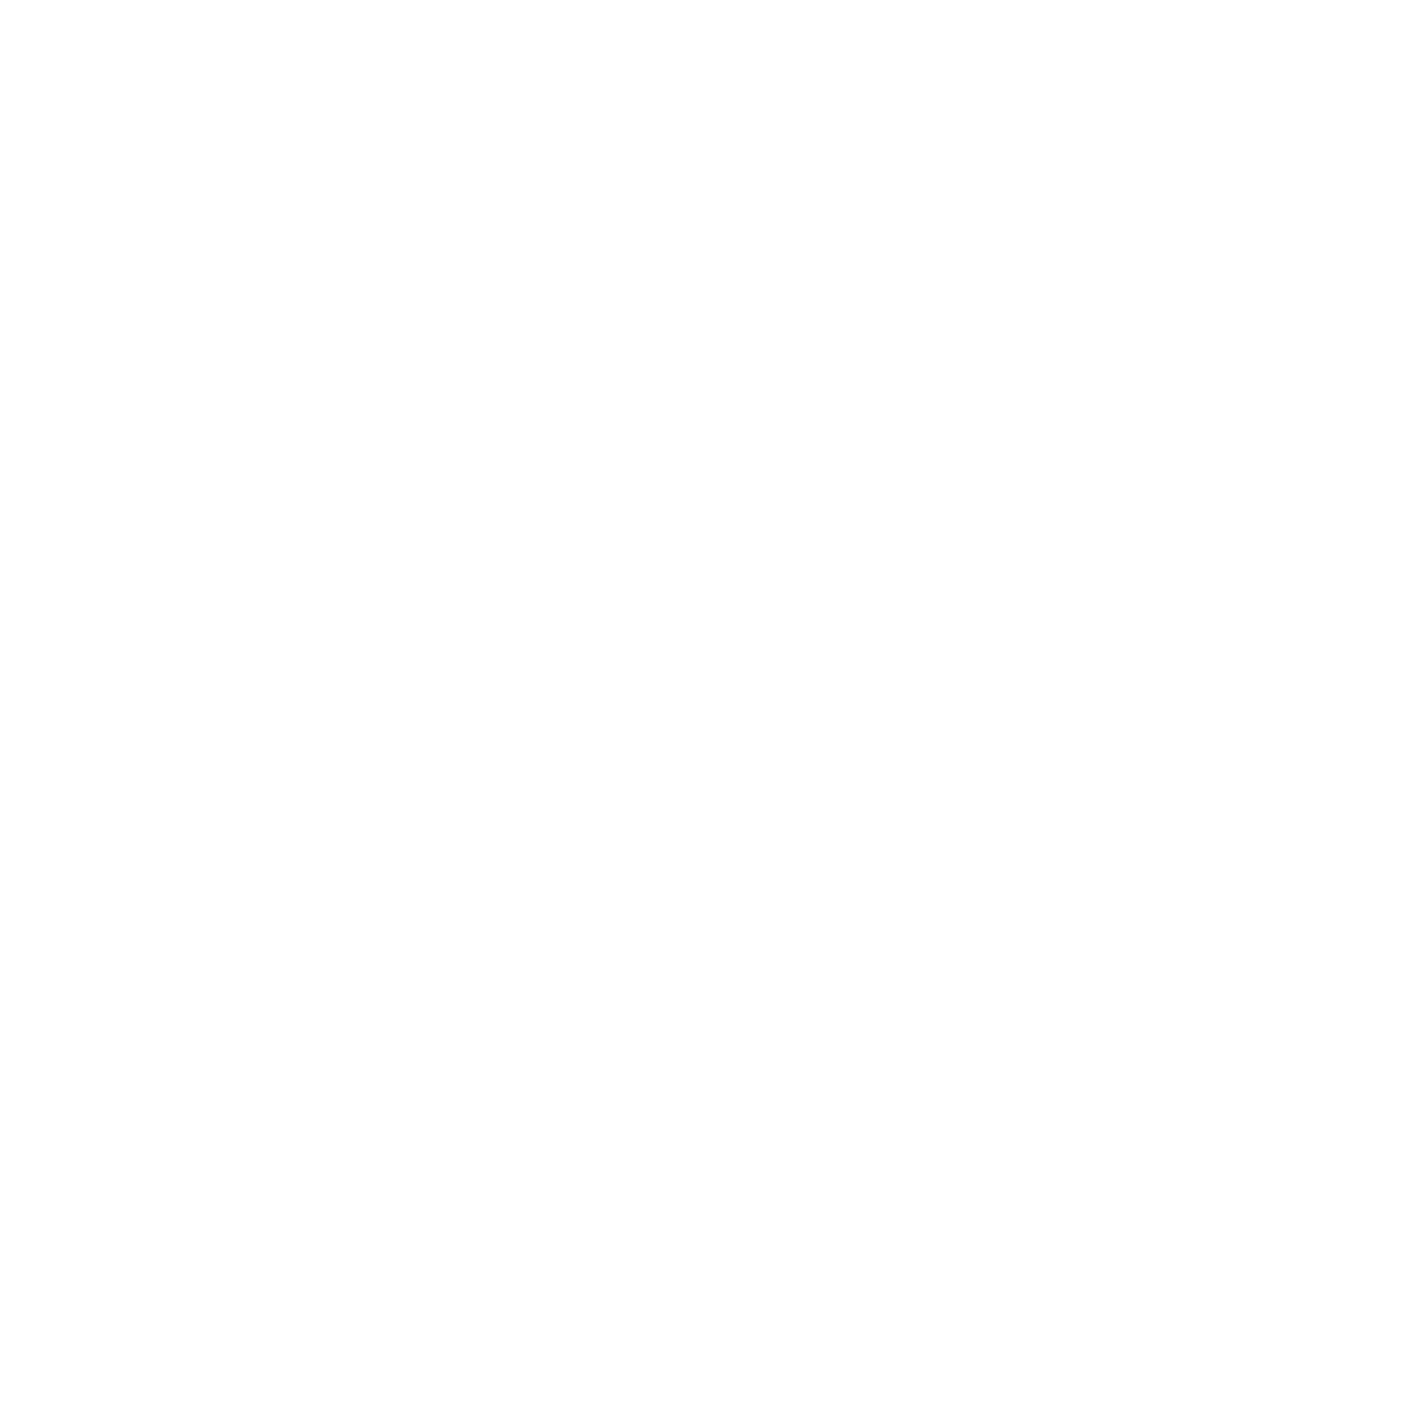 Patterned background - white circles